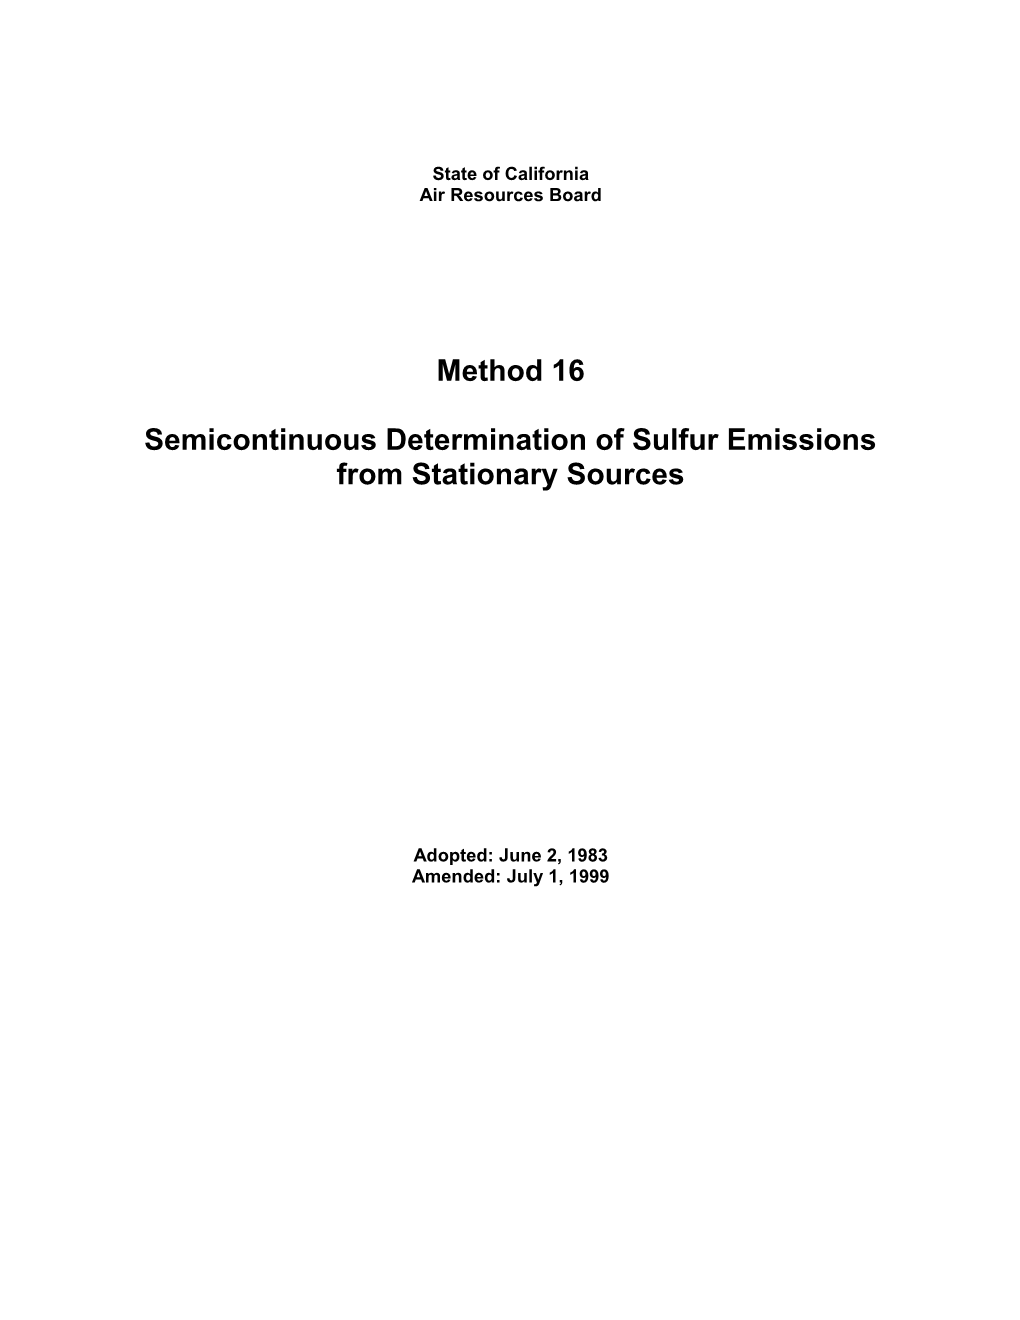 Test Method: Method 16 Semicontinuous Determination of Sulfur Emissions from Stationary Sources